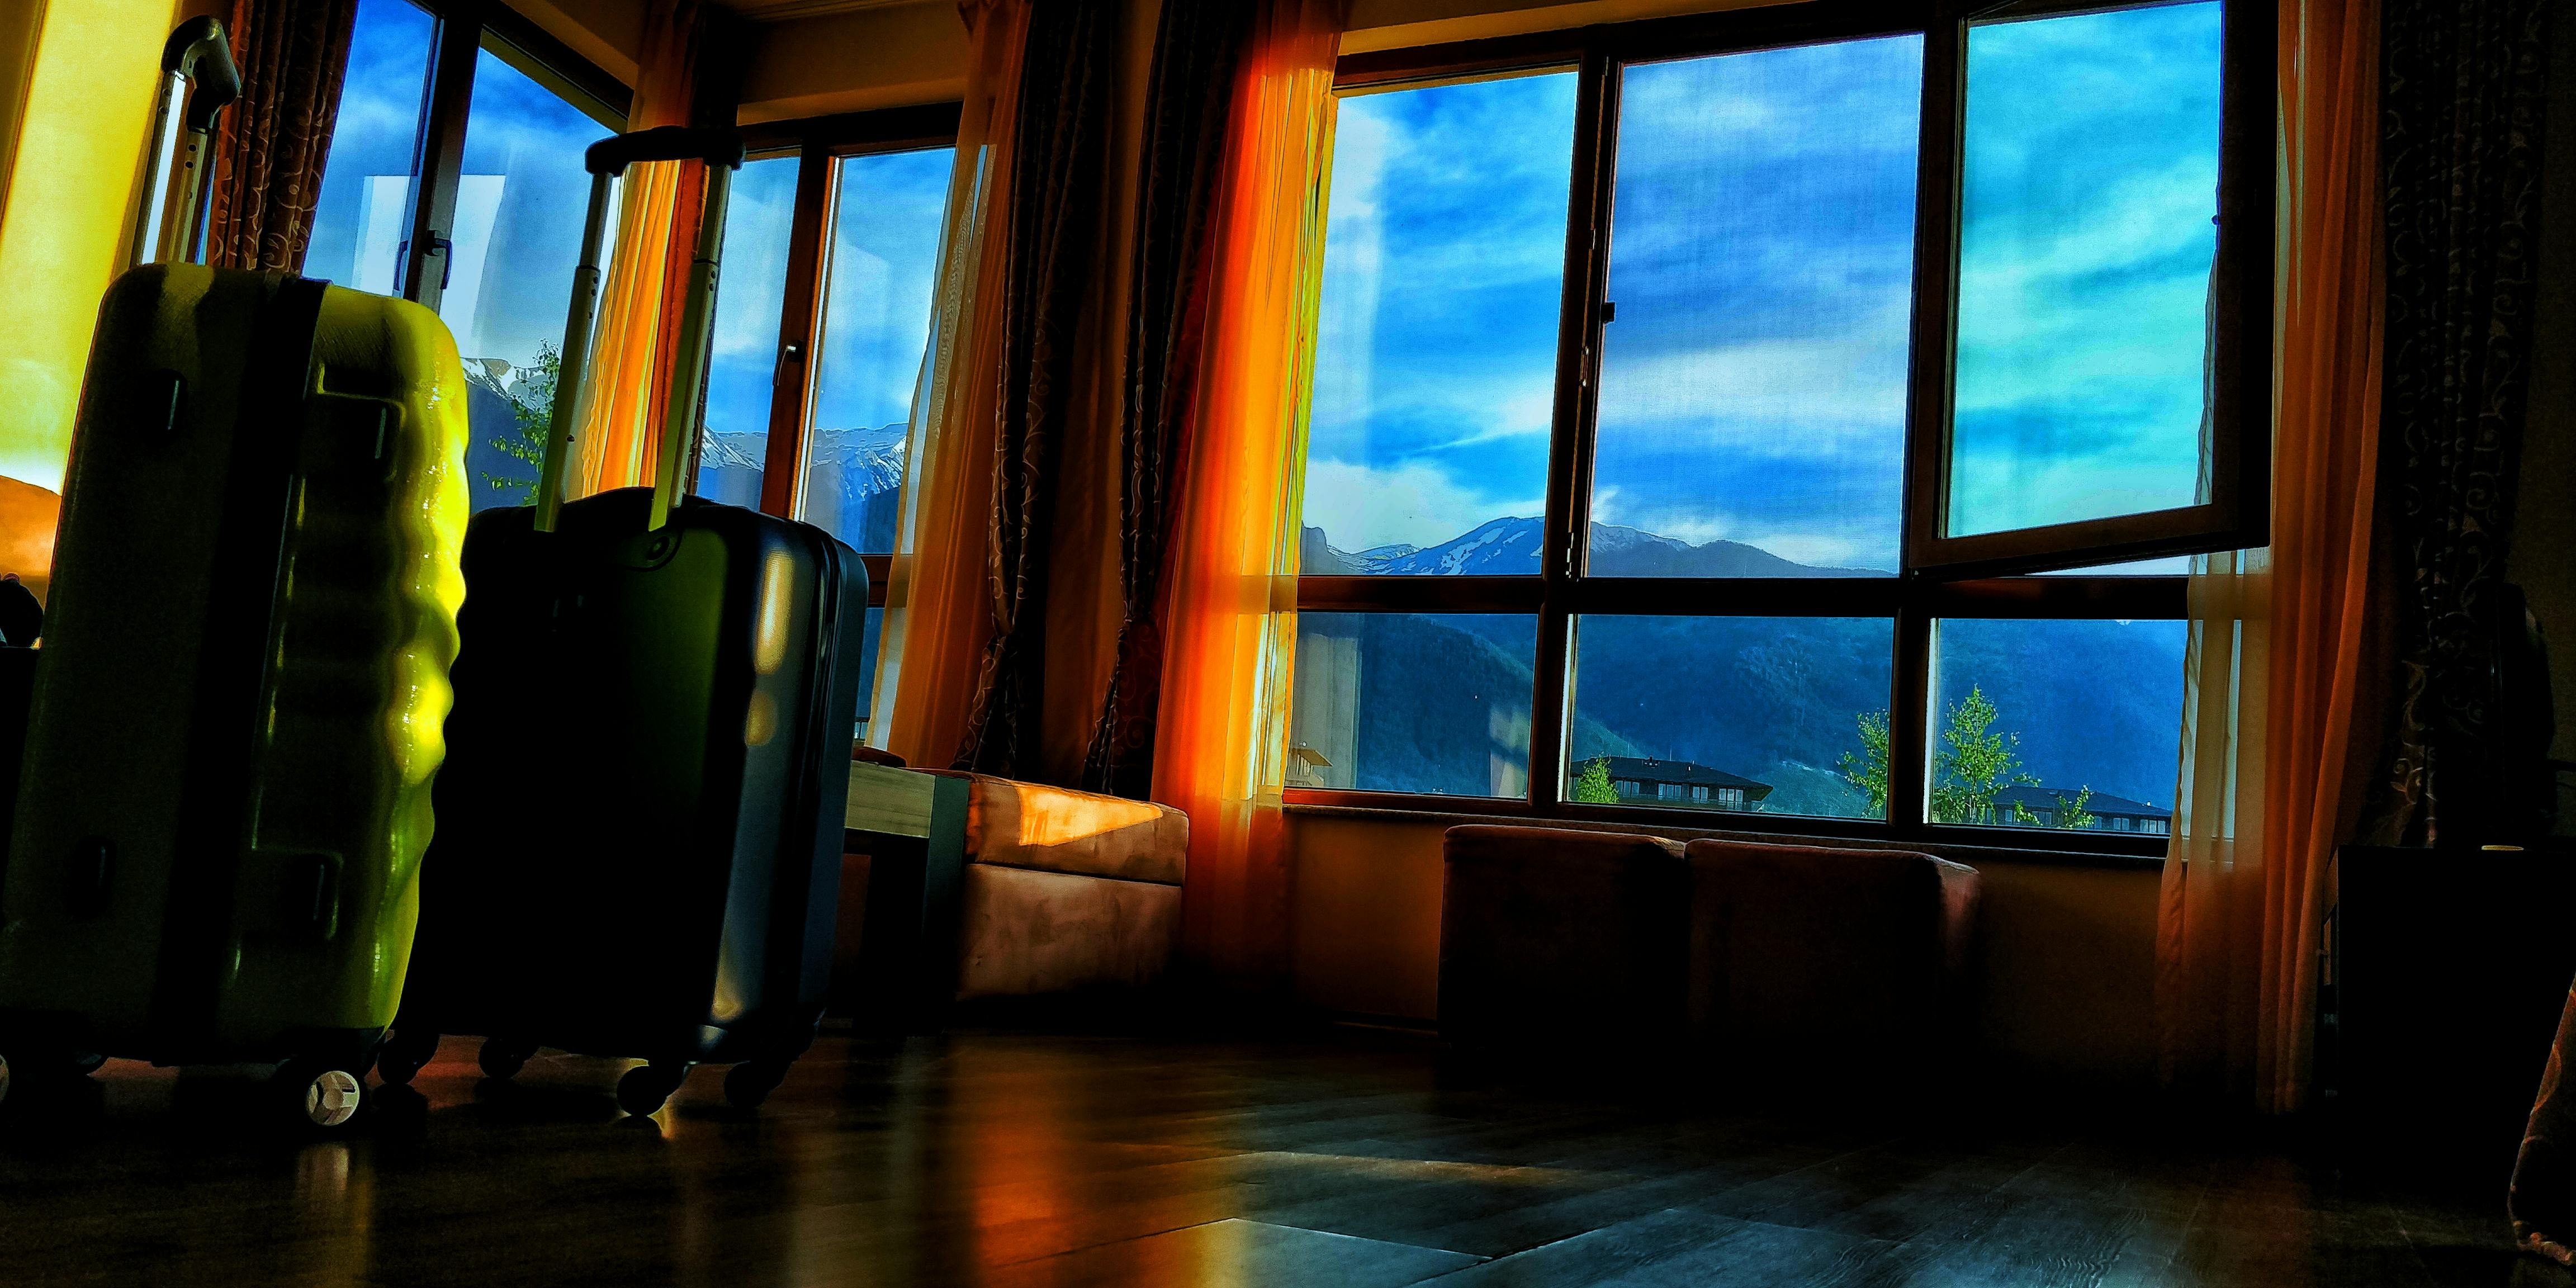 Free stock photo of blue mountains, hotel room